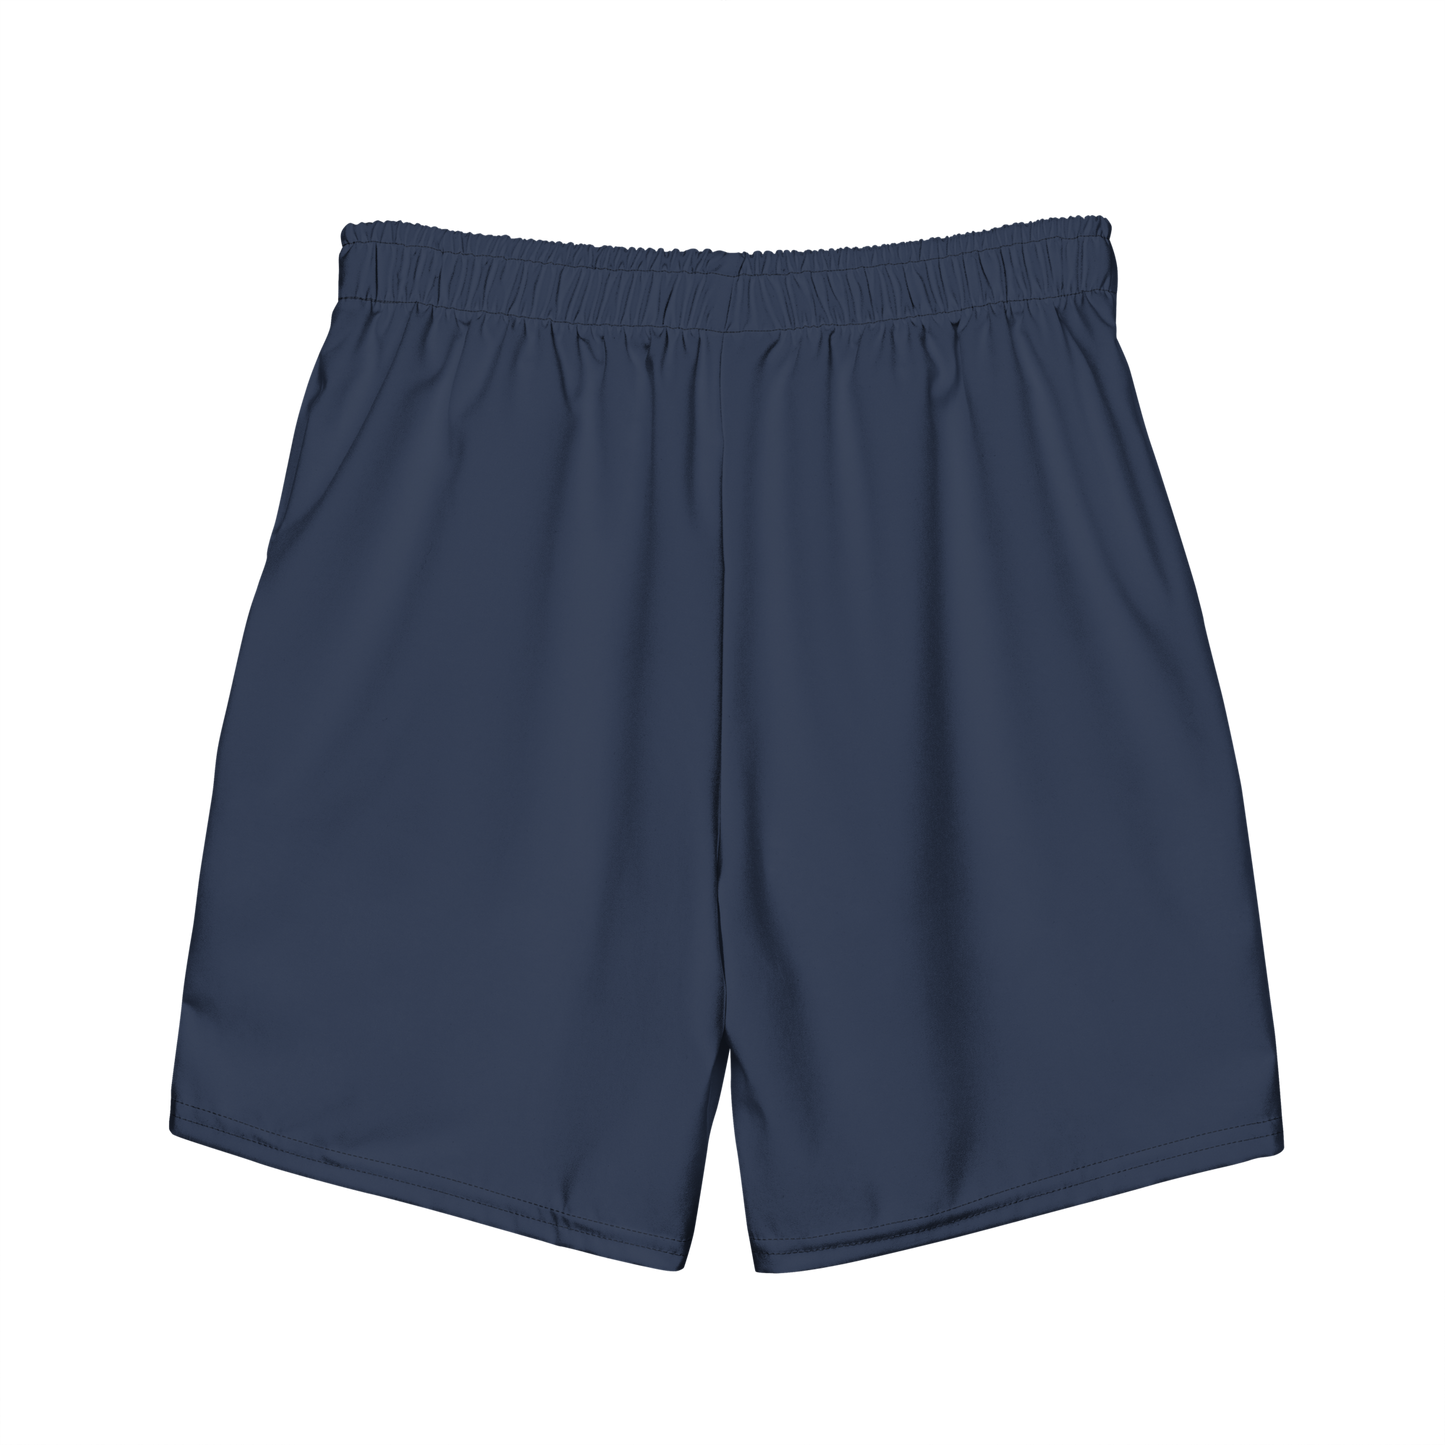 LUCKE Duck | Shorts | Recycled Polyester LUCK•E